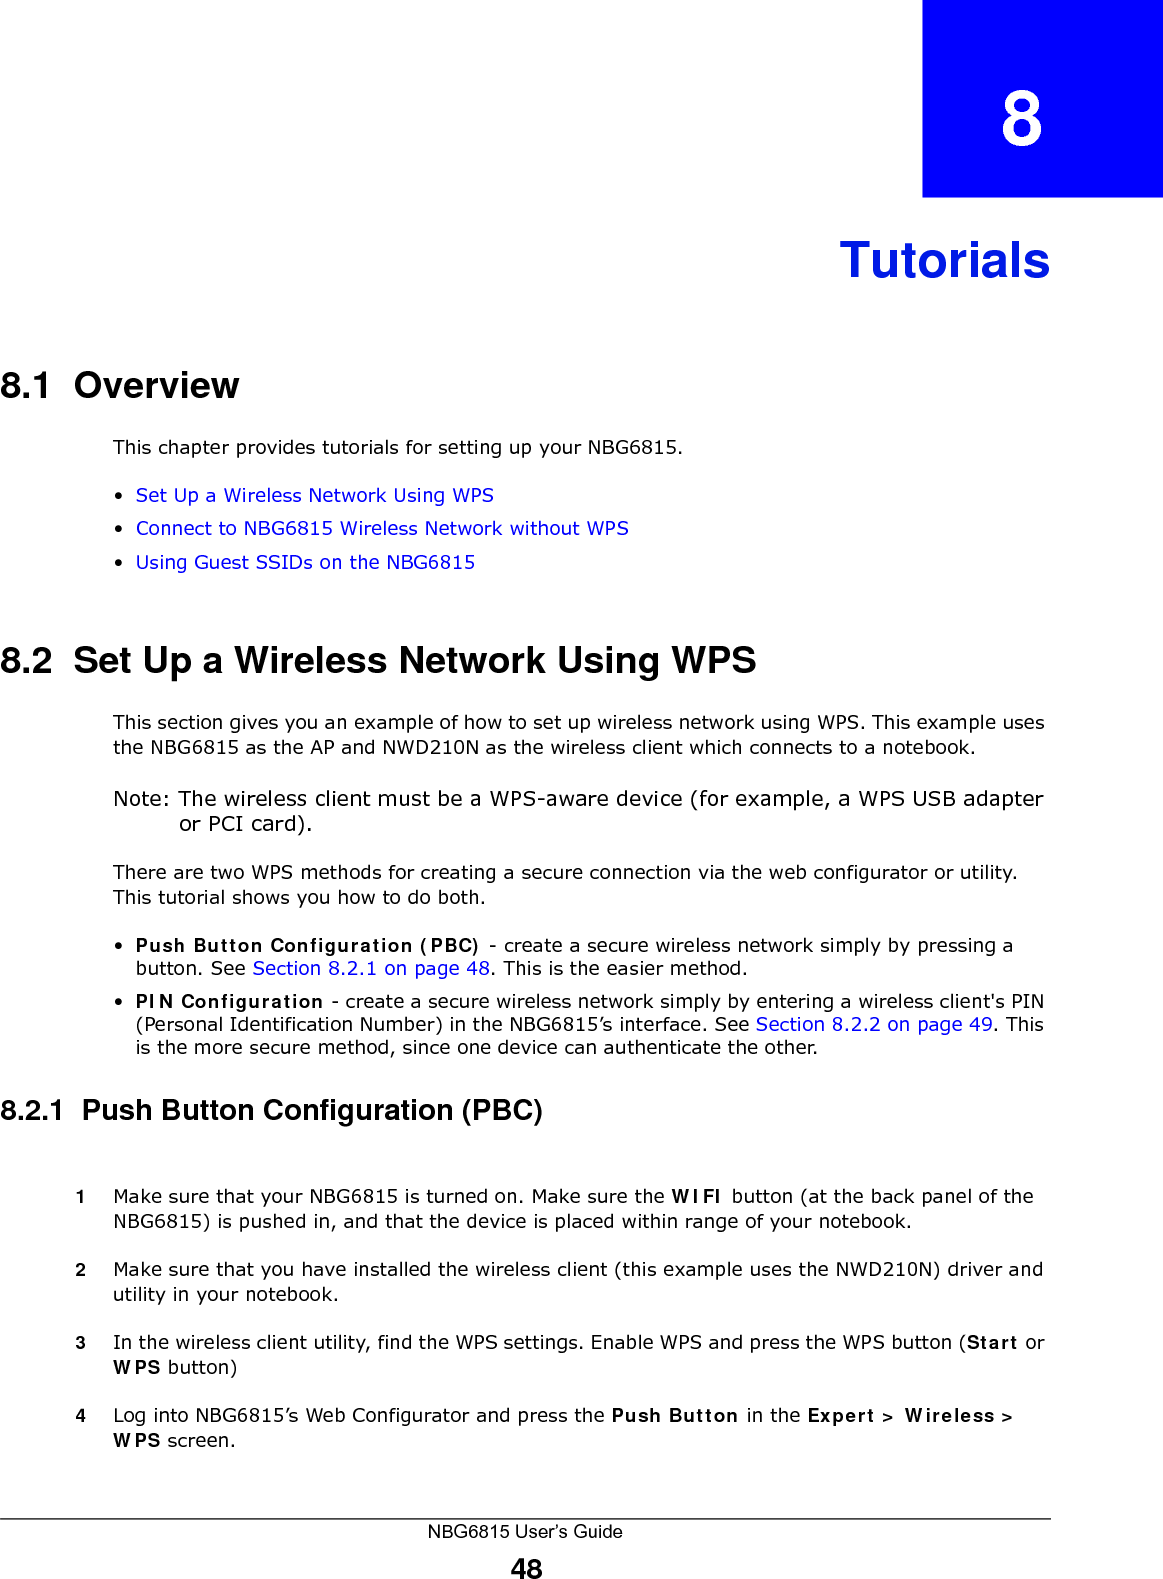 NBG6815 User’s Guide48CHAPTER   8Tutorials8.1  OverviewThis chapter provides tutorials for setting up your NBG6815.•Set Up a Wireless Network Using WPS•Connect to NBG6815 Wireless Network without WPS•Using Guest SSIDs on the NBG68158.2  Set Up a Wireless Network Using WPSThis section gives you an example of how to set up wireless network using WPS. This example uses the NBG6815 as the AP and NWD210N as the wireless client which connects to a notebook. Note: The wireless client must be a WPS-aware device (for example, a WPS USB adapter or PCI card).There are two WPS methods for creating a secure connection via the web configurator or utility. This tutorial shows you how to do both.•Push Button Configuration (PBC) - create a secure wireless network simply by pressing a button. See Section 8.2.1 on page 48. This is the easier method.•PIN Configuration - create a secure wireless network simply by entering a wireless client&apos;s PIN (Personal Identification Number) in the NBG6815’s interface. See Section 8.2.2 on page 49. This is the more secure method, since one device can authenticate the other.8.2.1  Push Button Configuration (PBC)1Make sure that your NBG6815 is turned on. Make sure the WIFI button (at the back panel of the NBG6815) is pushed in, and that the device is placed within range of your notebook. 2Make sure that you have installed the wireless client (this example uses the NWD210N) driver and utility in your notebook.3In the wireless client utility, find the WPS settings. Enable WPS and press the WPS button (Start or WPS button)4Log into NBG6815’s Web Configurator and press the Push Button in the Expert &gt; Wireless &gt;  WPS screen. 